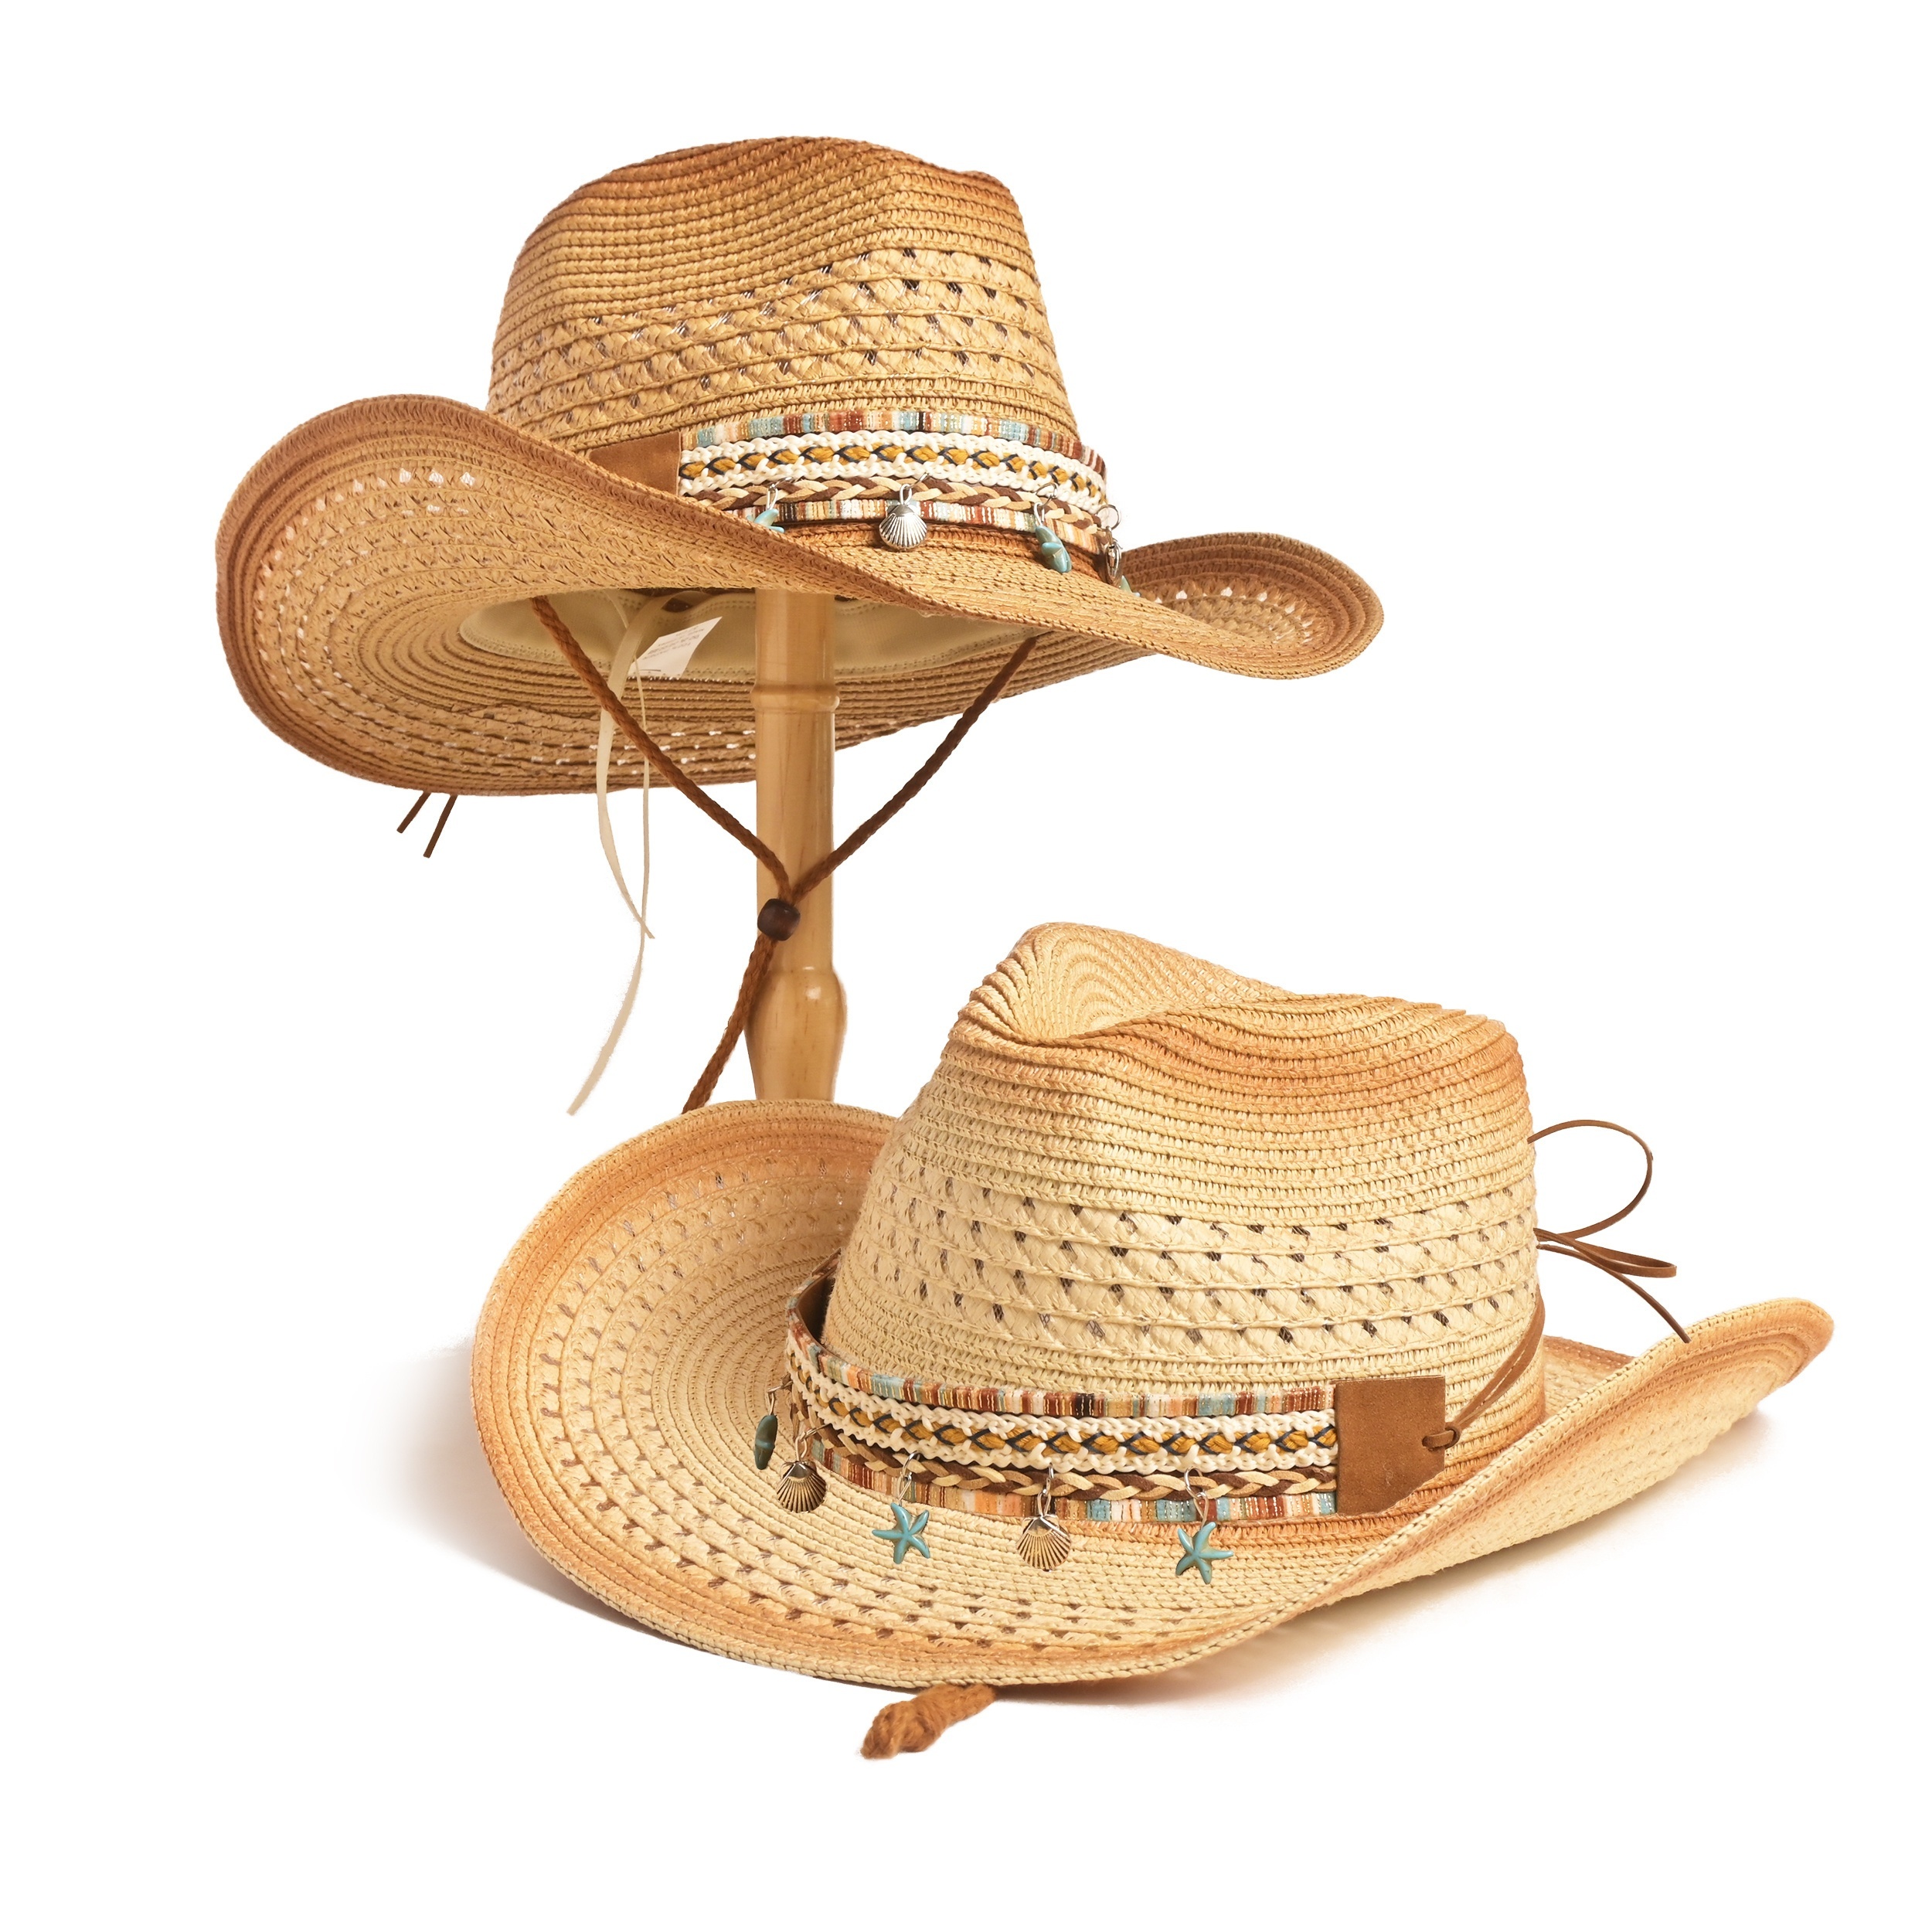 

Boho-chic Summer Straw Hat With Star & Shell Accents - Breathable, Non-stretch, Tie-dye Design For Women